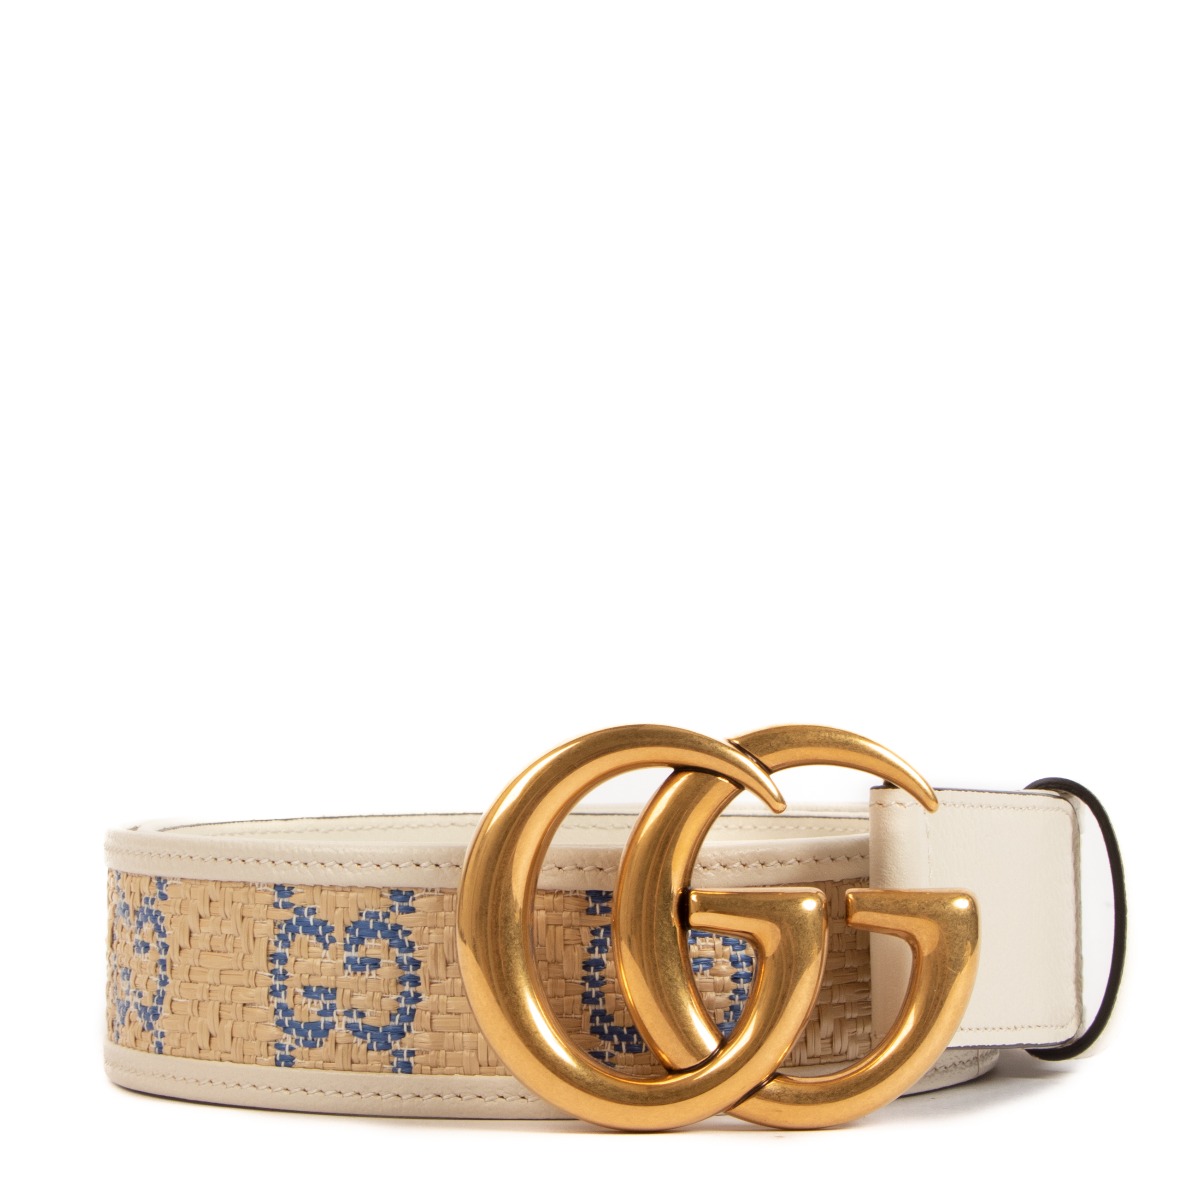 Gucci Leather-Trimmed Belt w/ Tags - Size 40